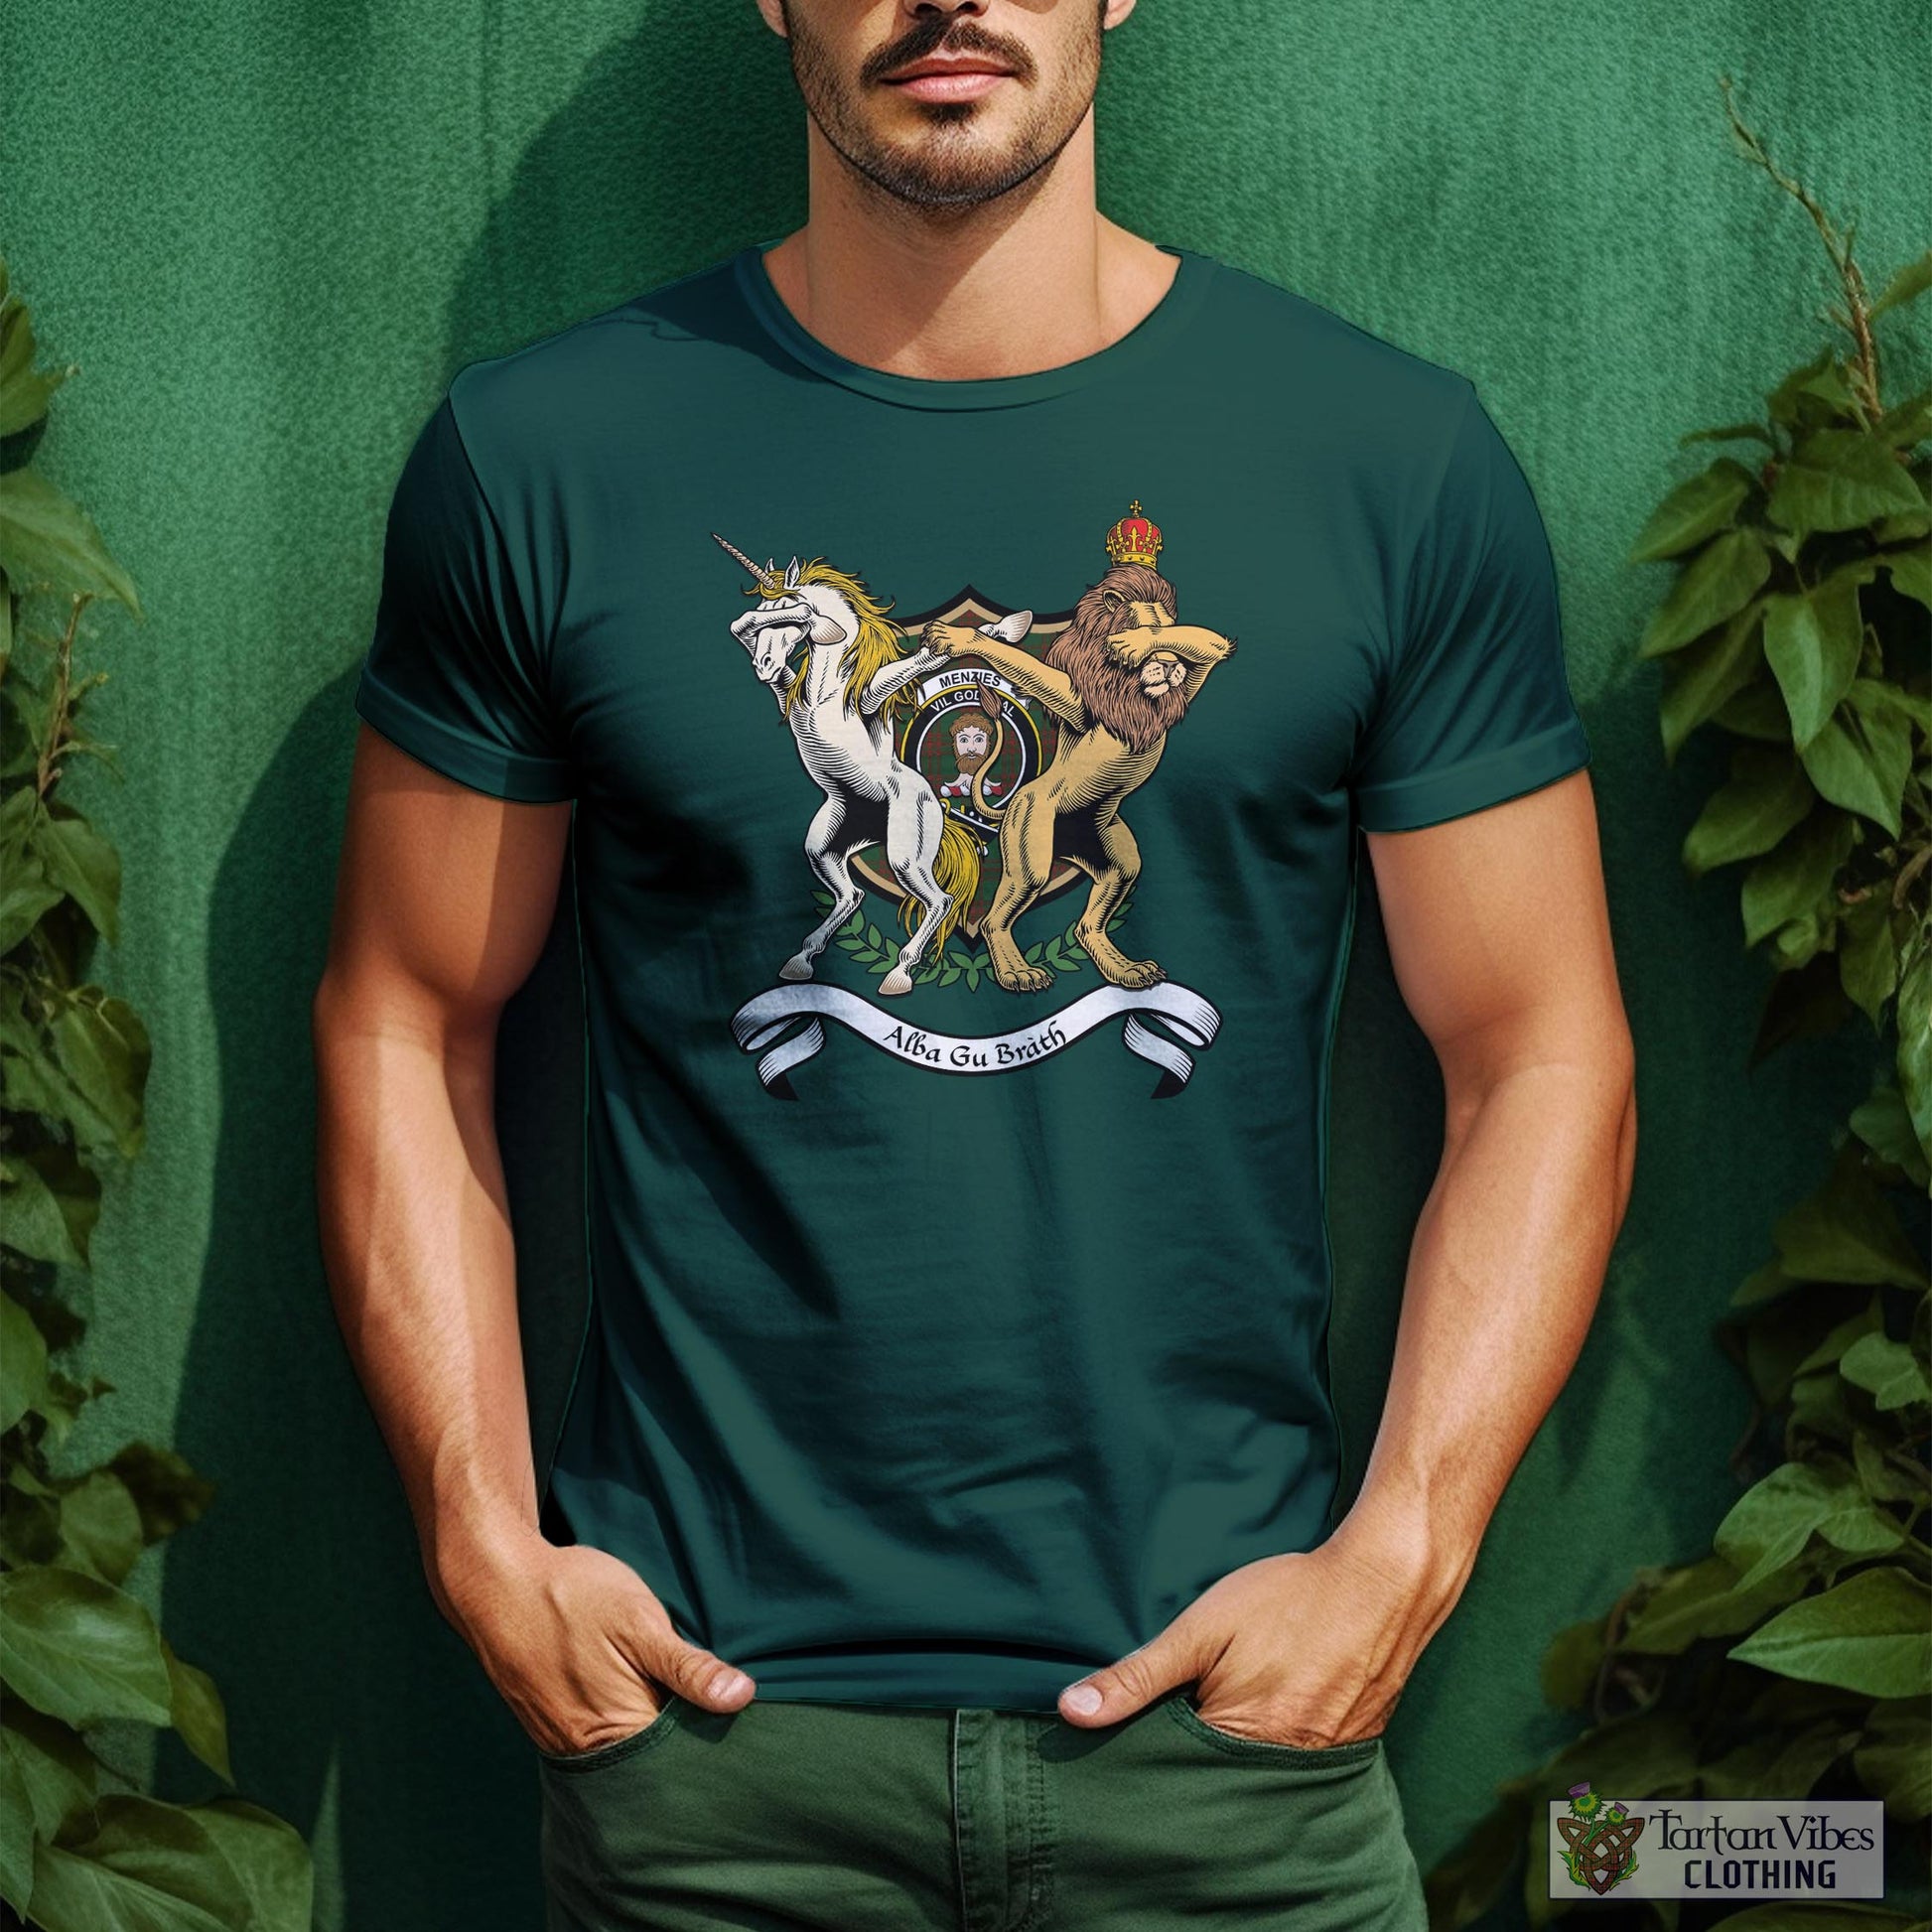 Tartan Vibes Clothing Menzies Family Crest Cotton Men's T-Shirt with Scotland Royal Coat Of Arm Funny Style